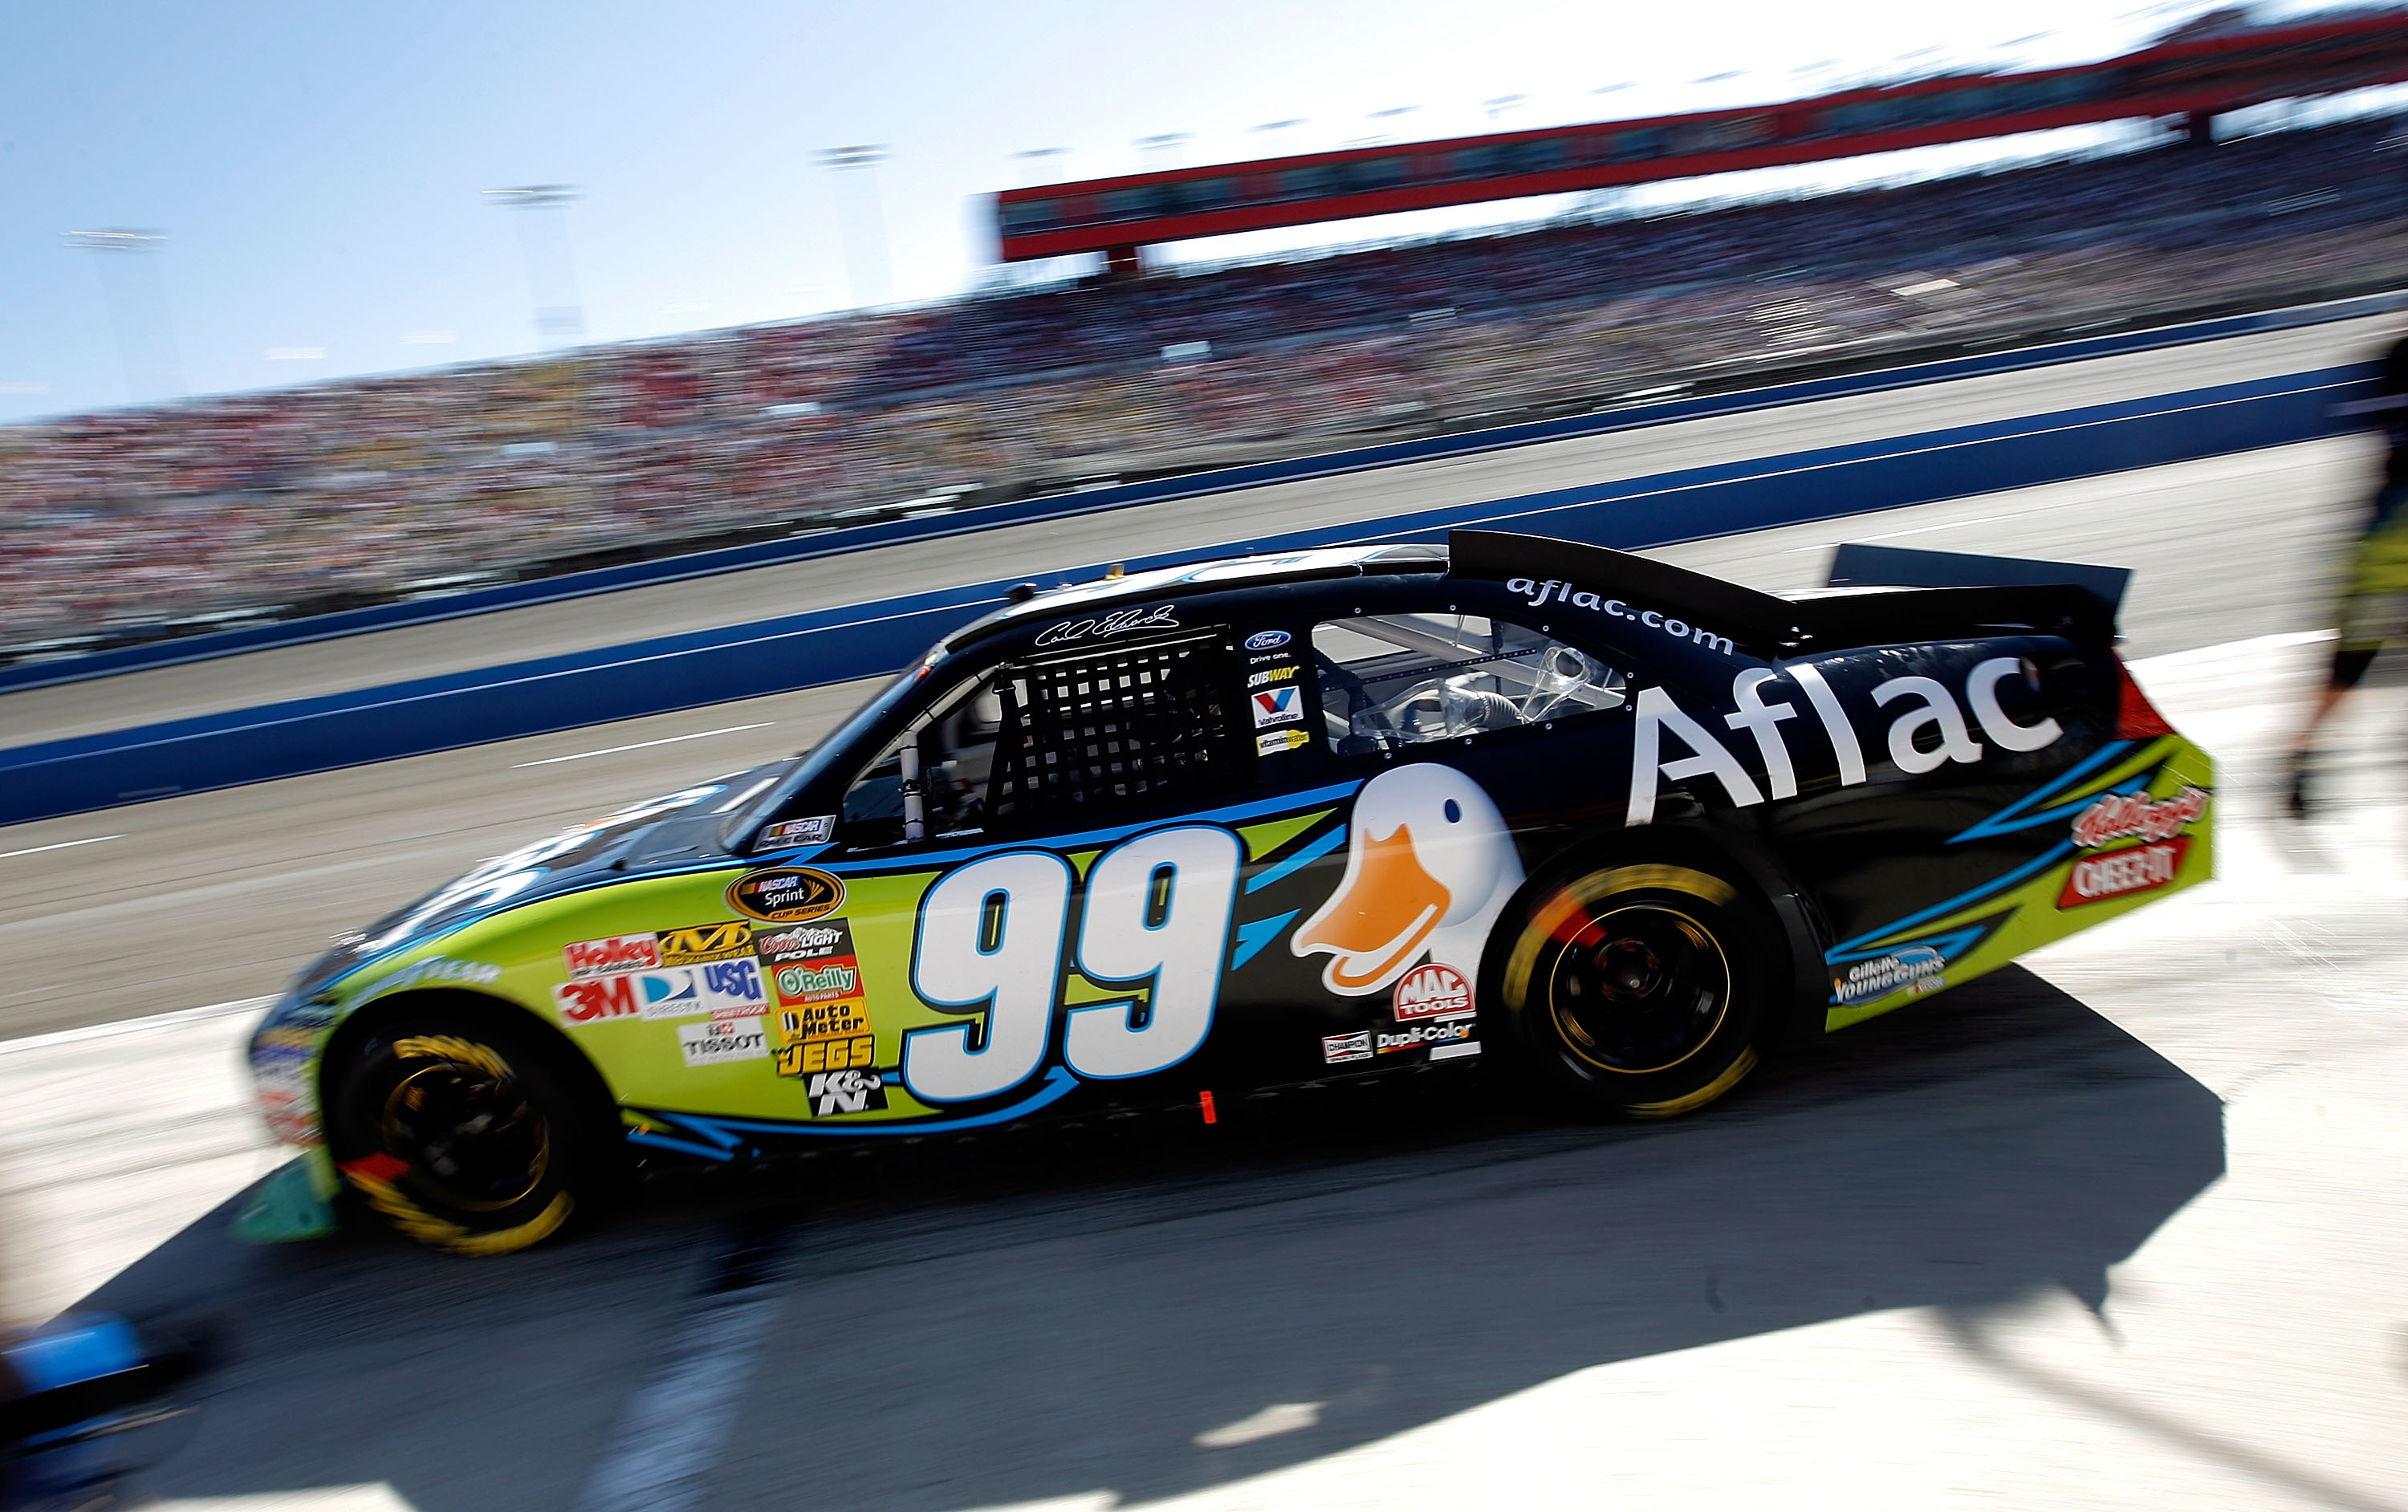 FONTANA, CA - OCTOBER 10:  Carl Edwards, driver of the #99 Aflac Ford, leaves the pits after making a stop during the NASCAR Sprint Cup Series Pepsi Max 400 on October 10, 2010 in Fontana, California.  (Photo by Tom Pennington/Getty Images for NASCAR)